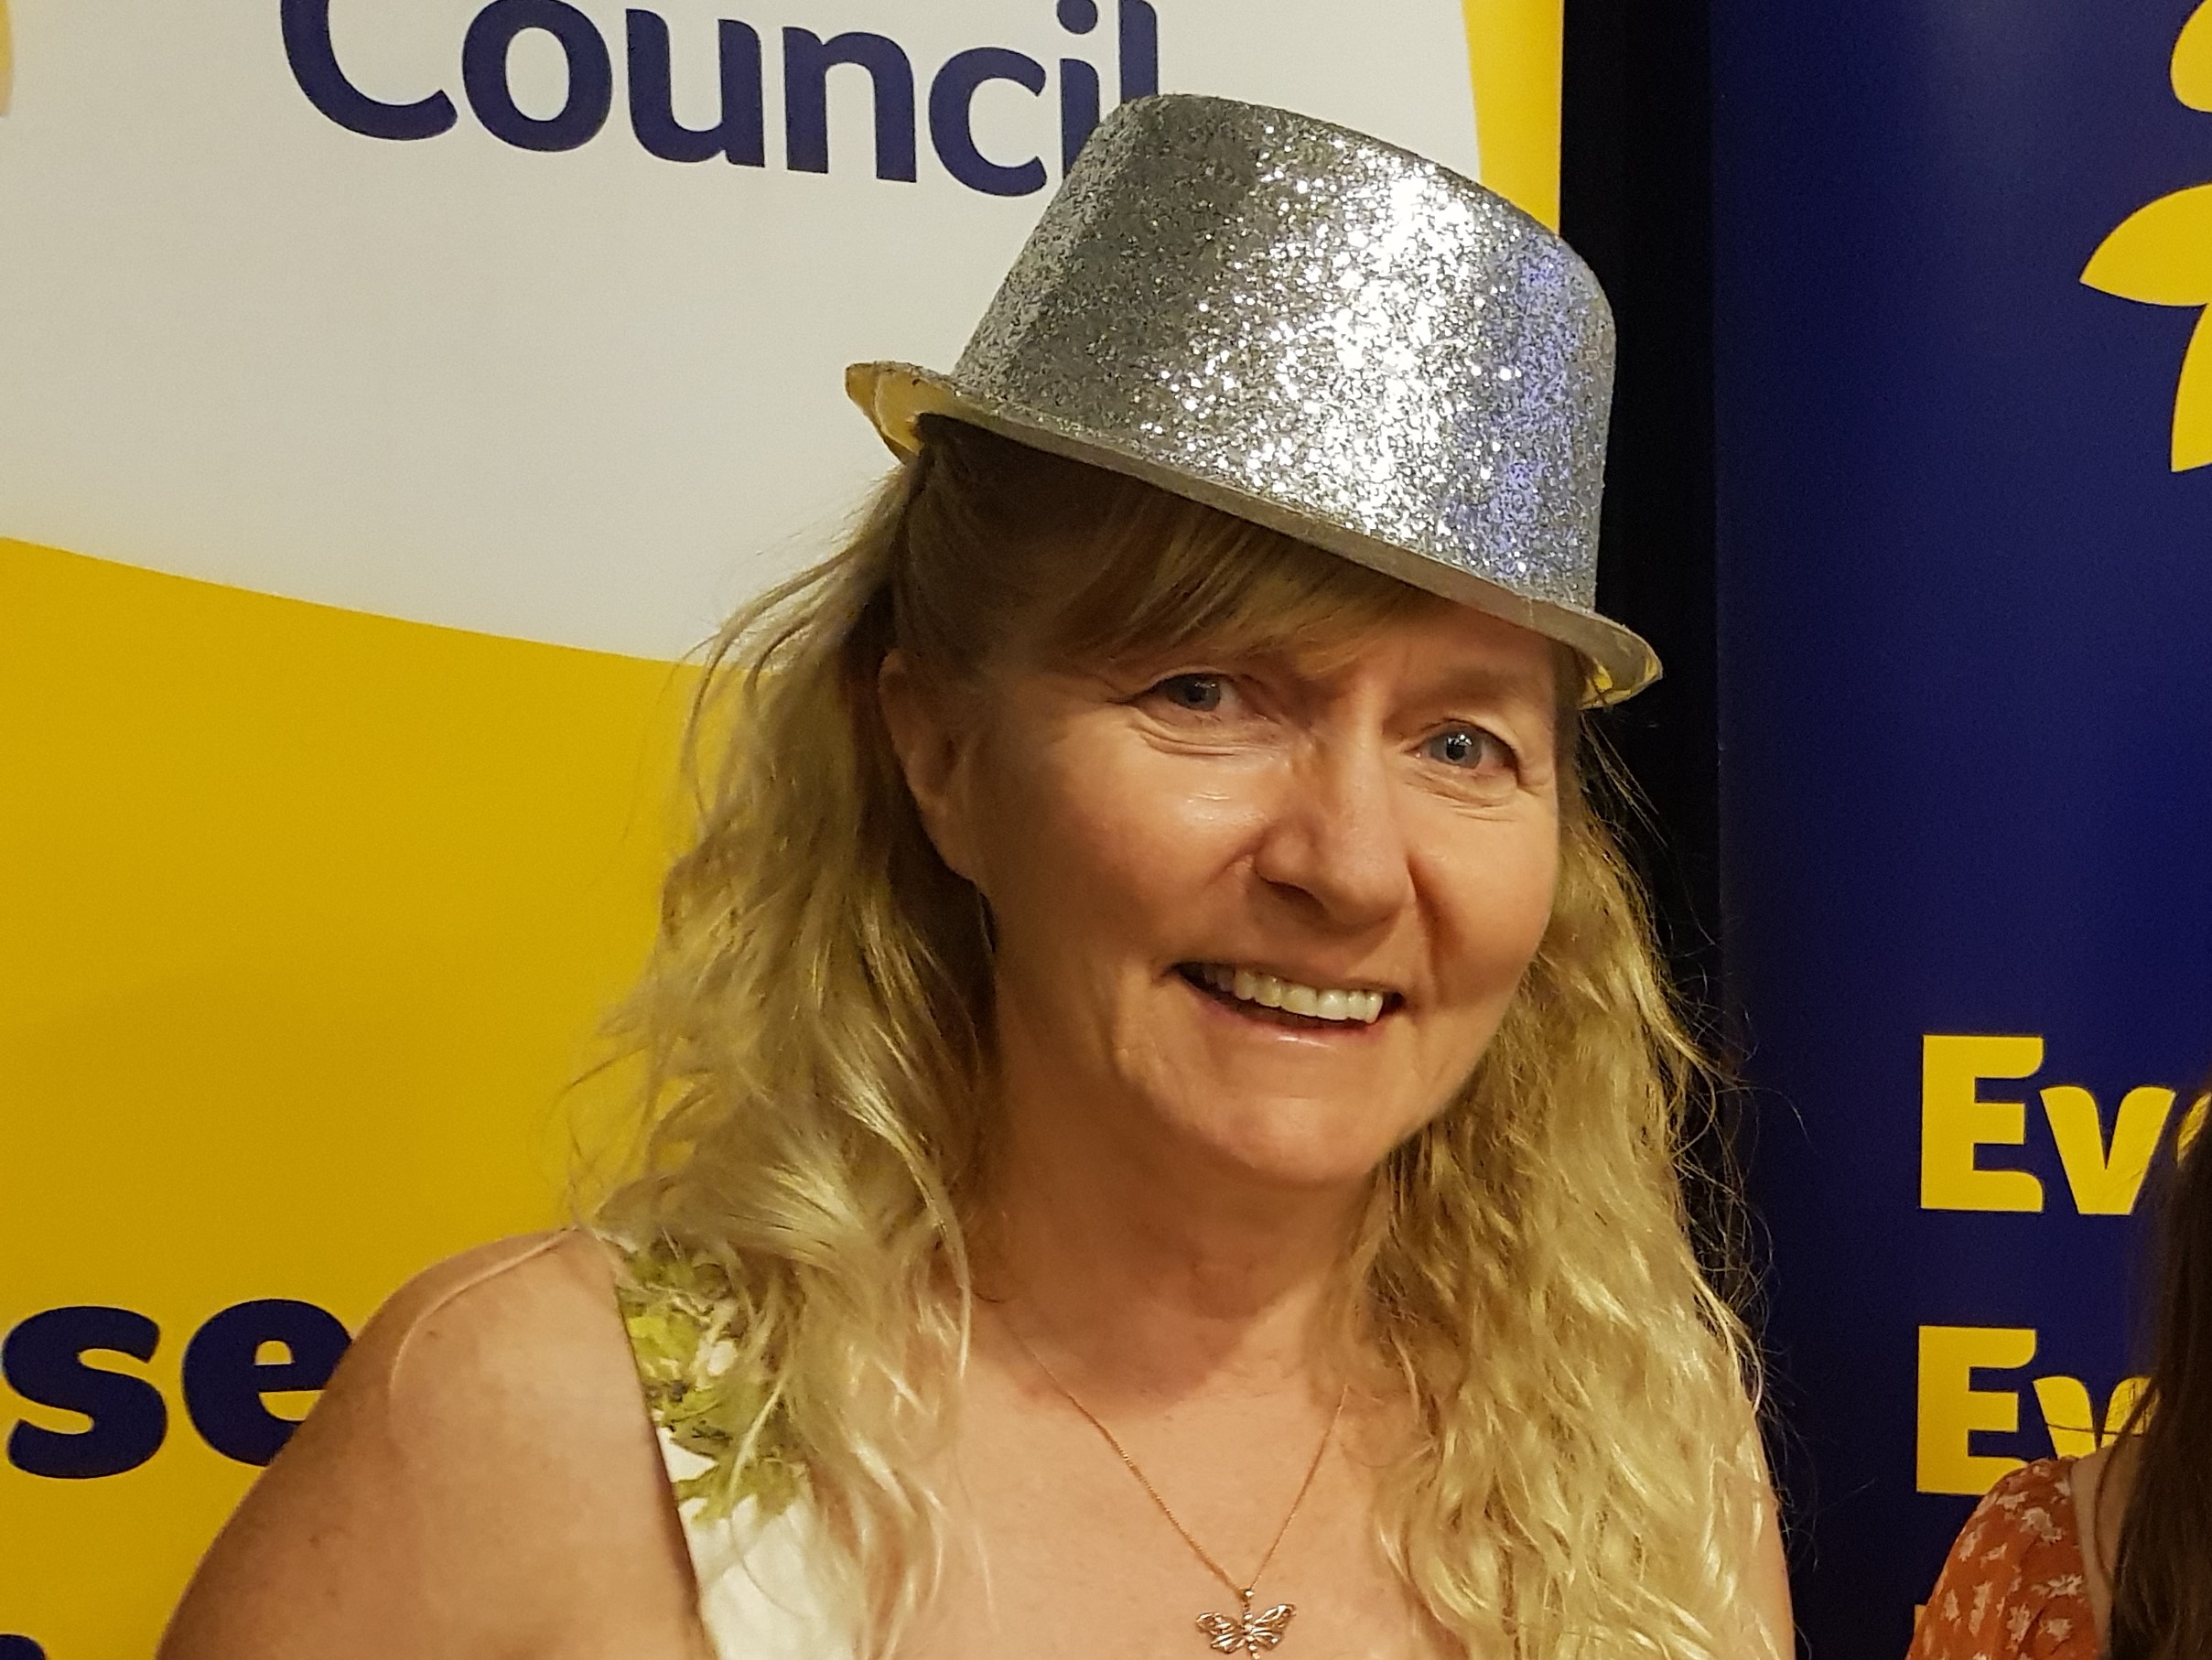 Introducing your 2021 Stars of Narrabri: Mary Whitehouse